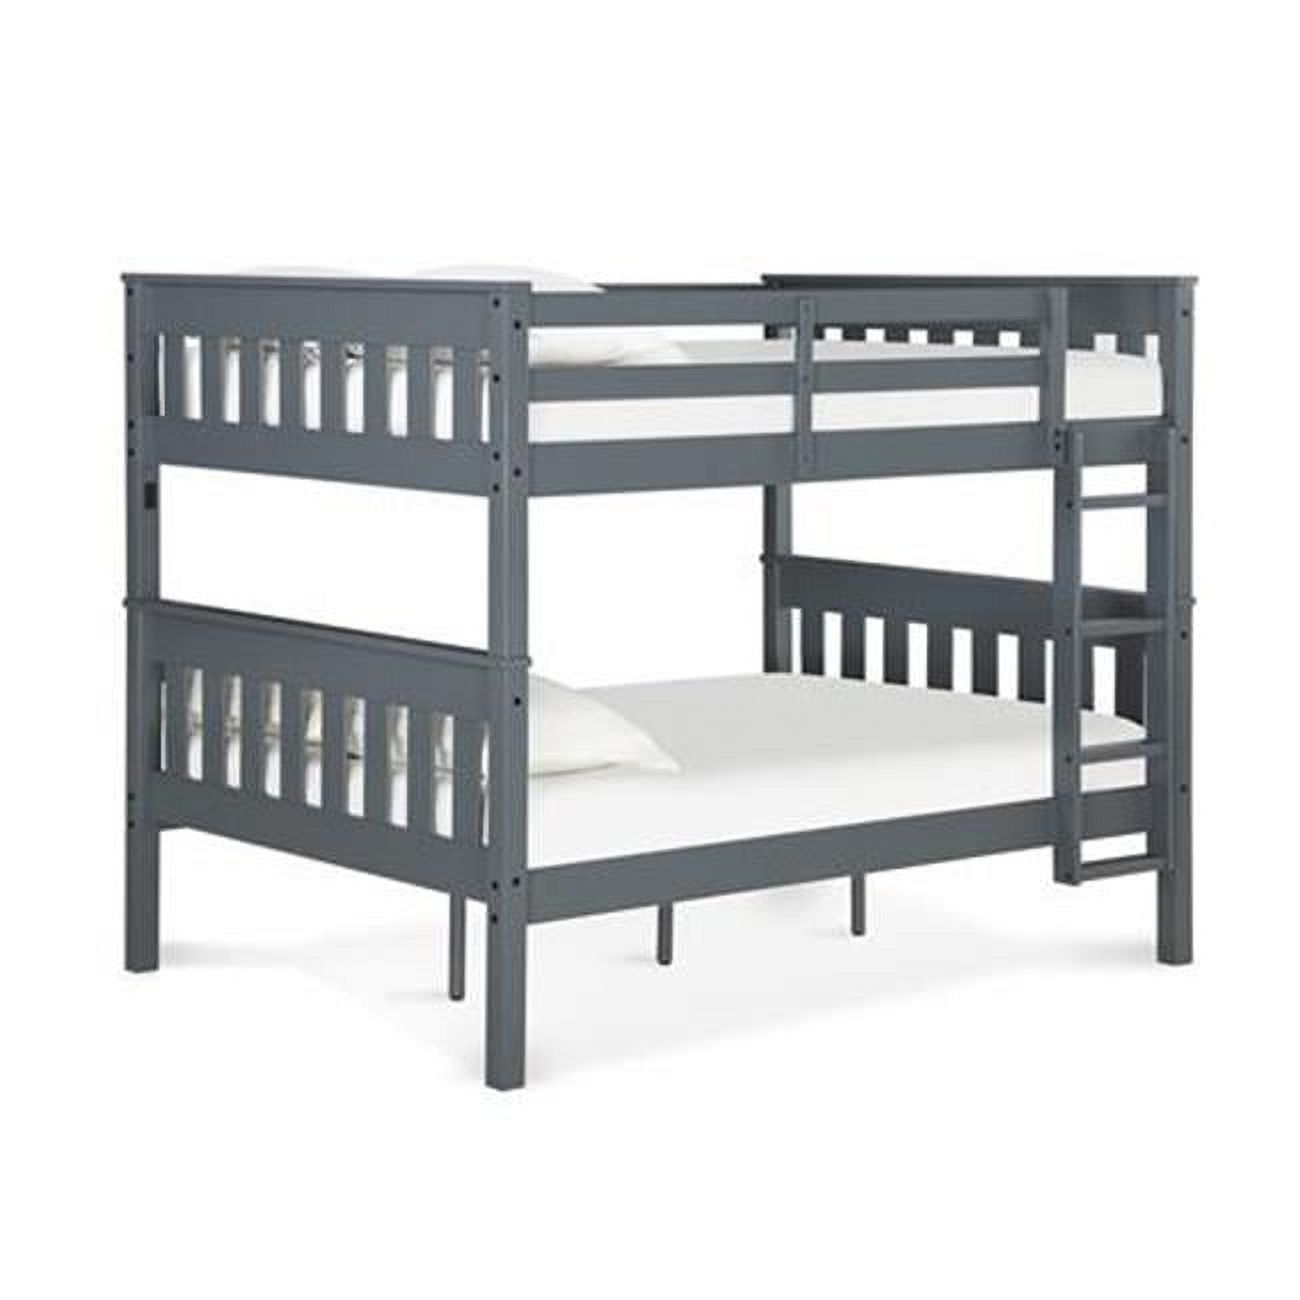 Dorel Living Moon Full over Full Wood Bunk Bed with USB Port in Gray - image 1 of 9